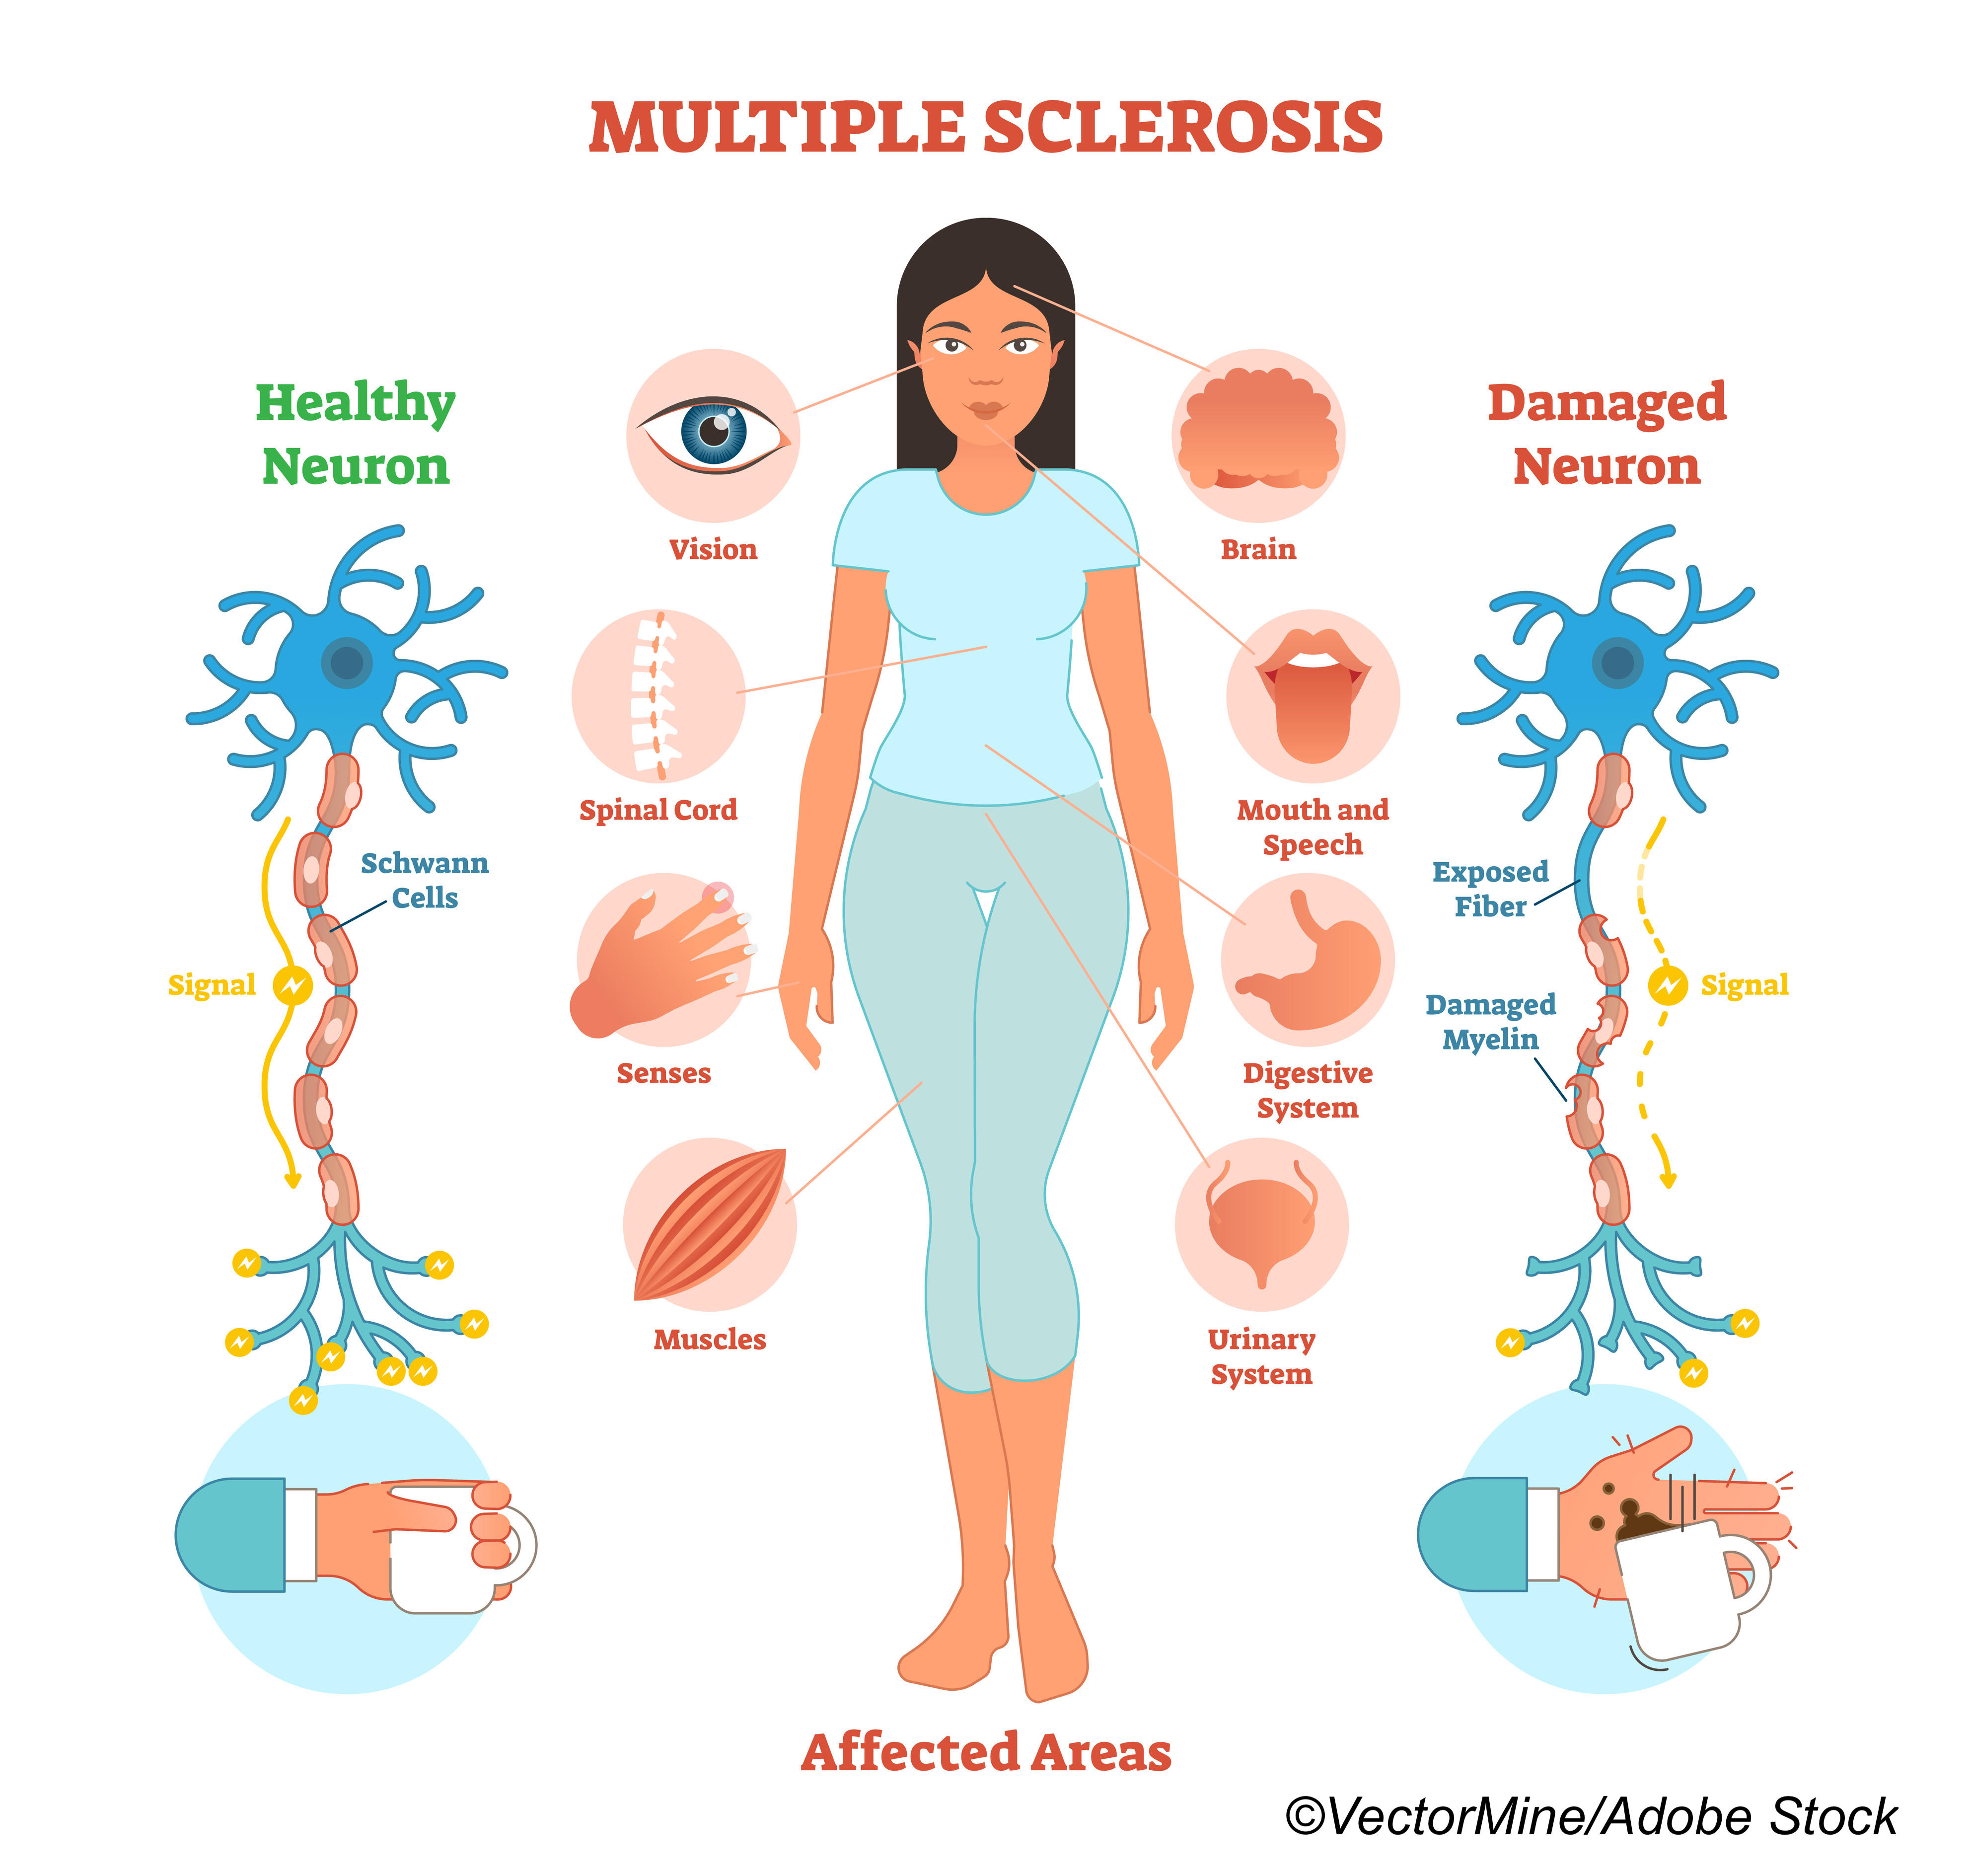 2017 Multiple Sclerosis Criteria More Sensitive But Less Specific Than 2010 Version